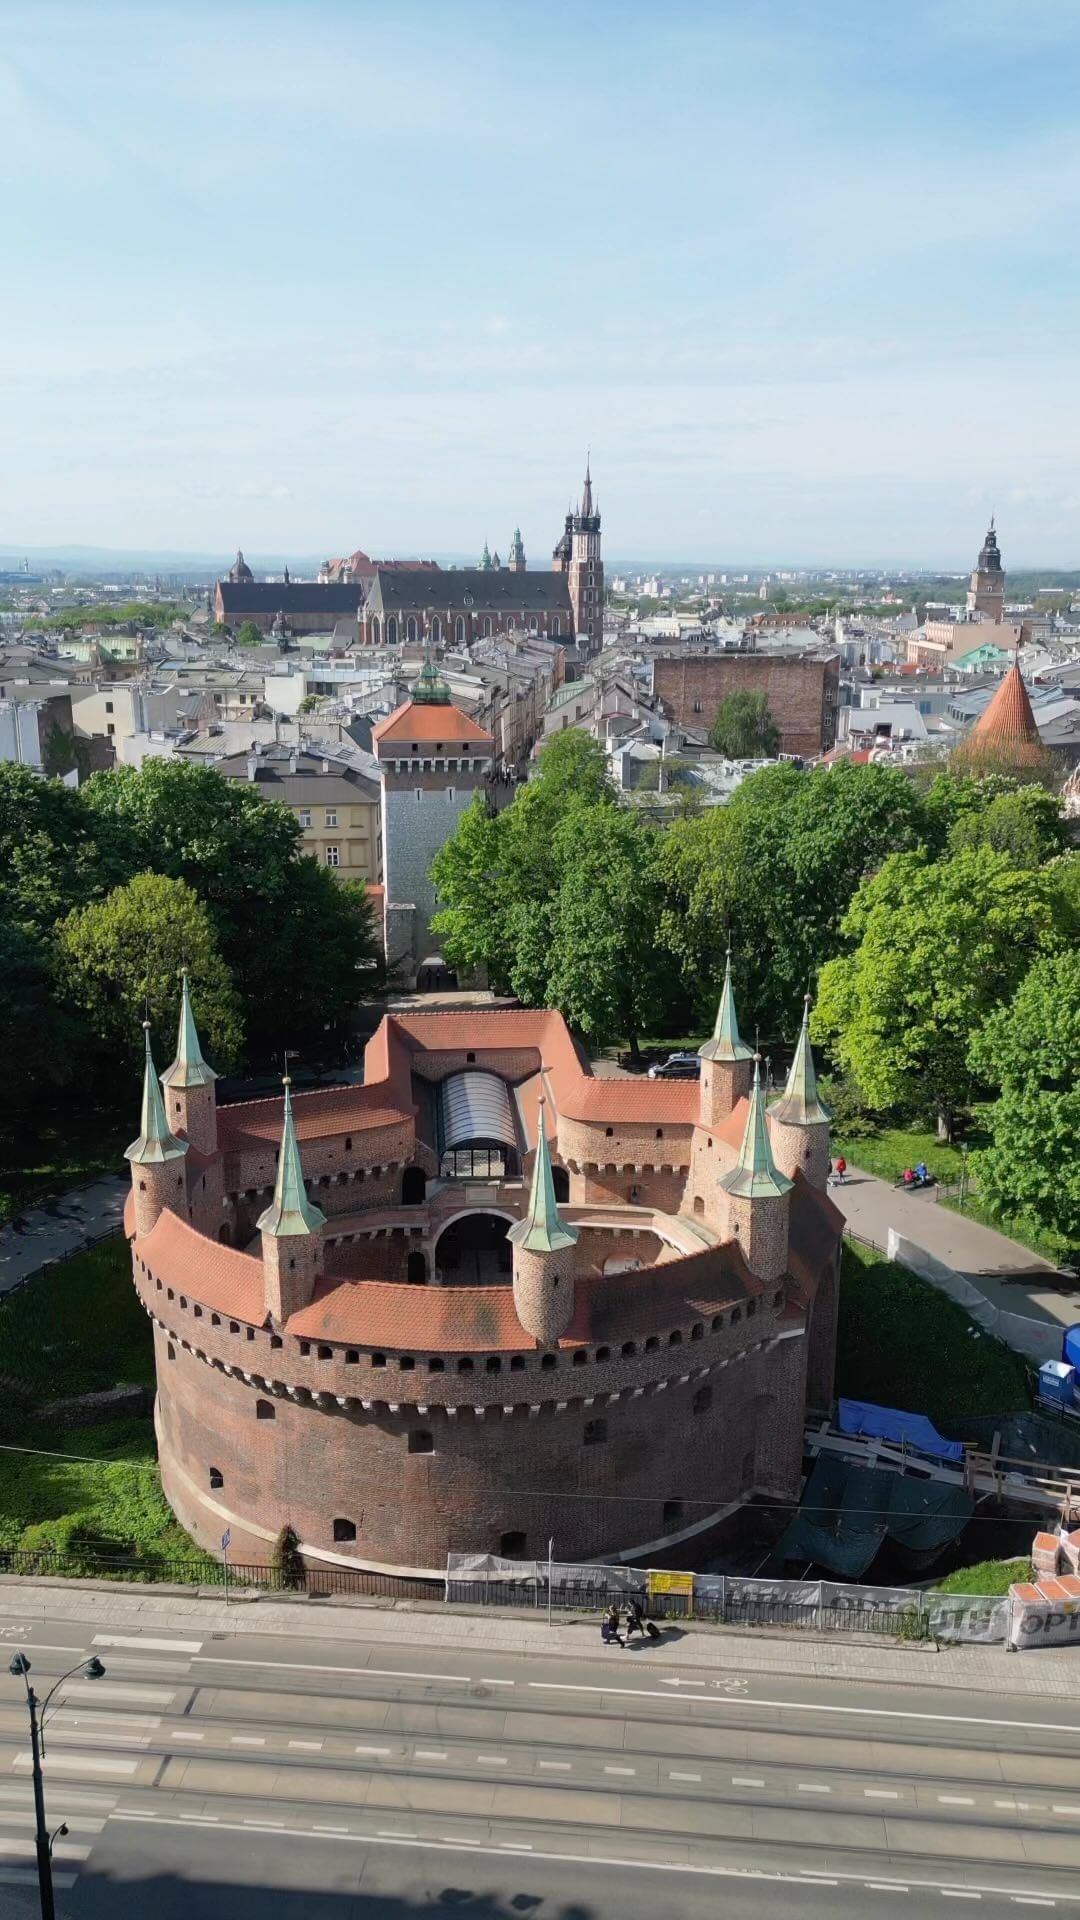 3-day trip to Krakow: Exploring History and Culture